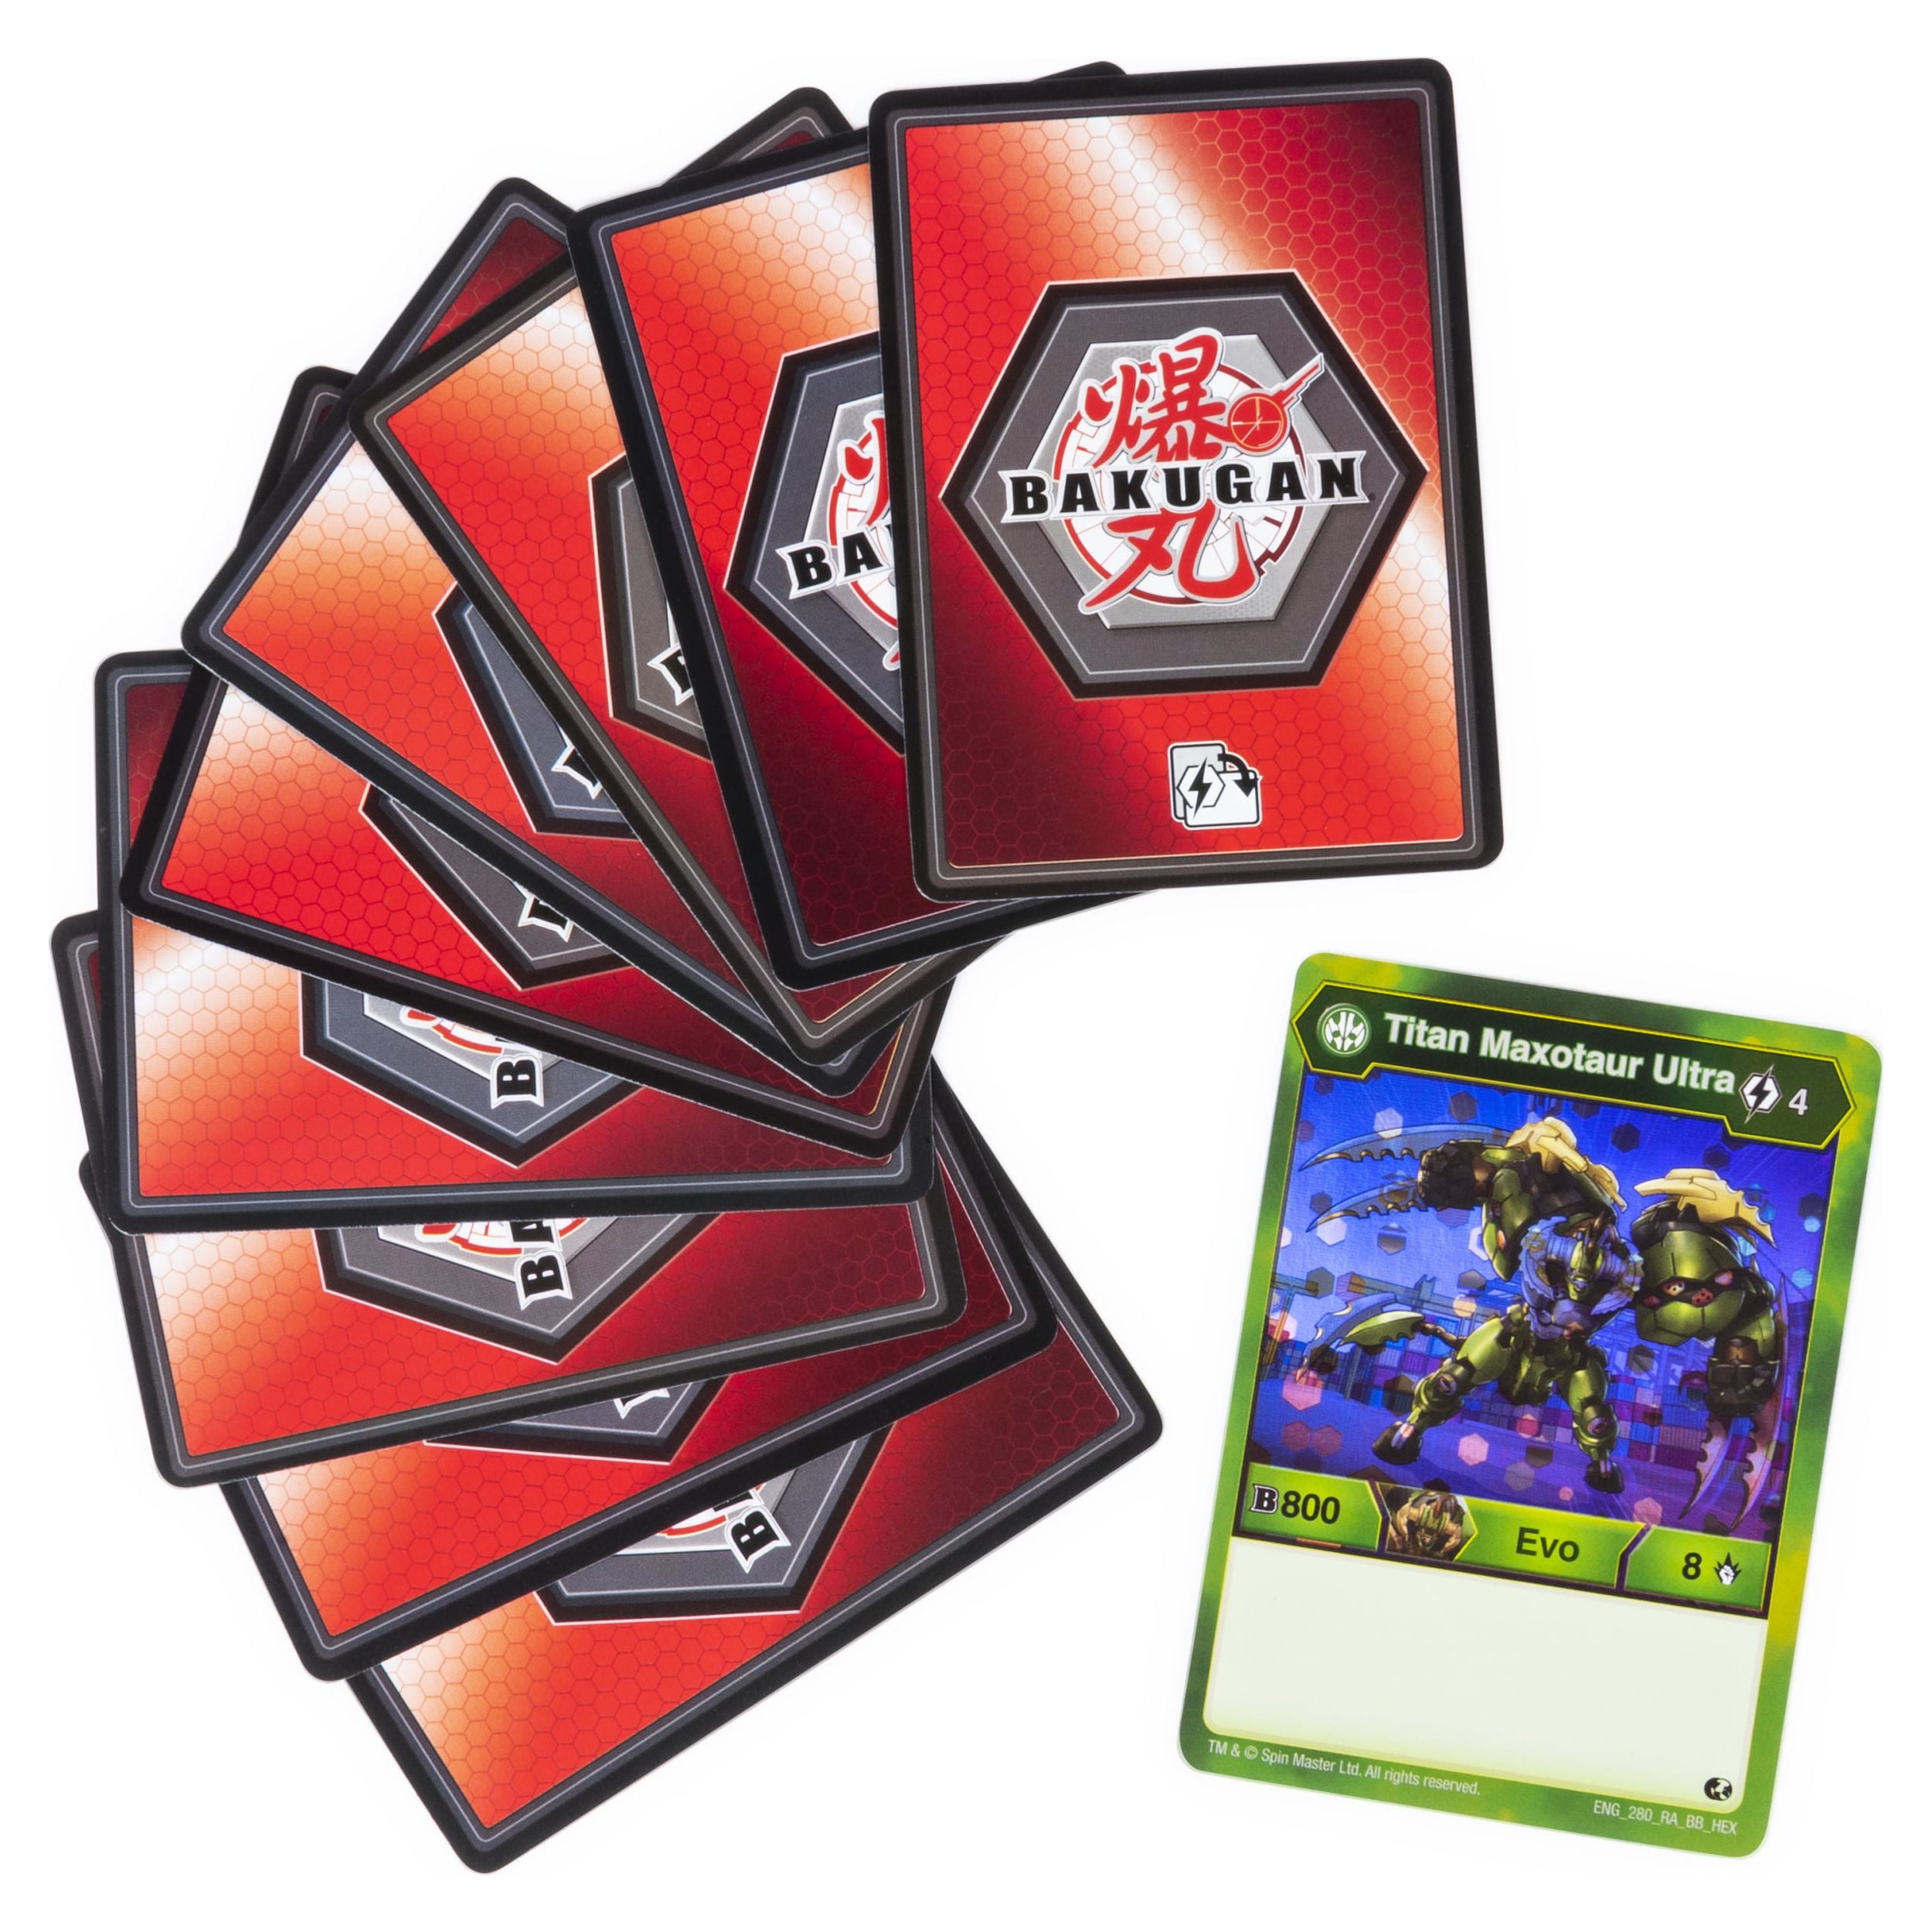 Sold at Auction: BAKUGAN BATTLE BRAWLERS W/ 2 BOOSTER PACKS